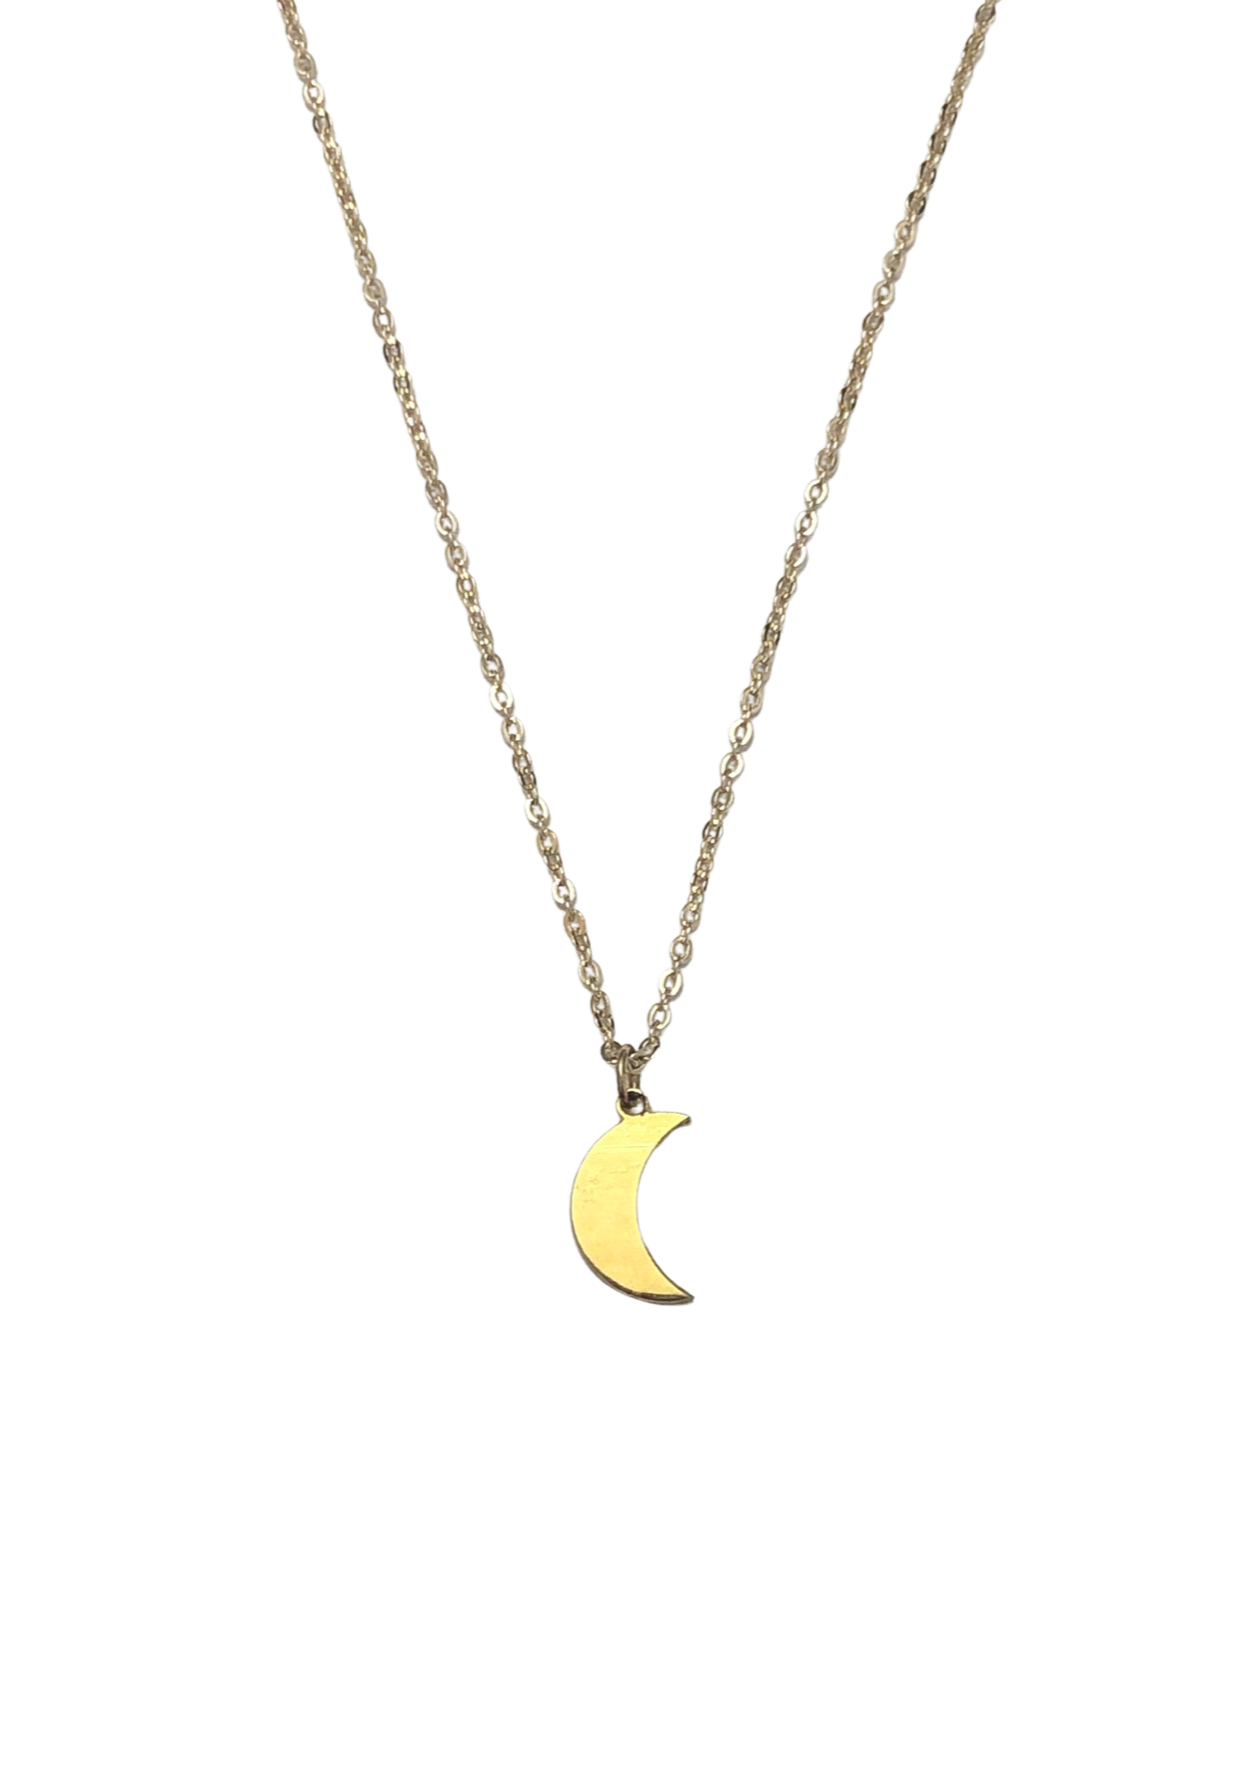 Moon Charm Necklace